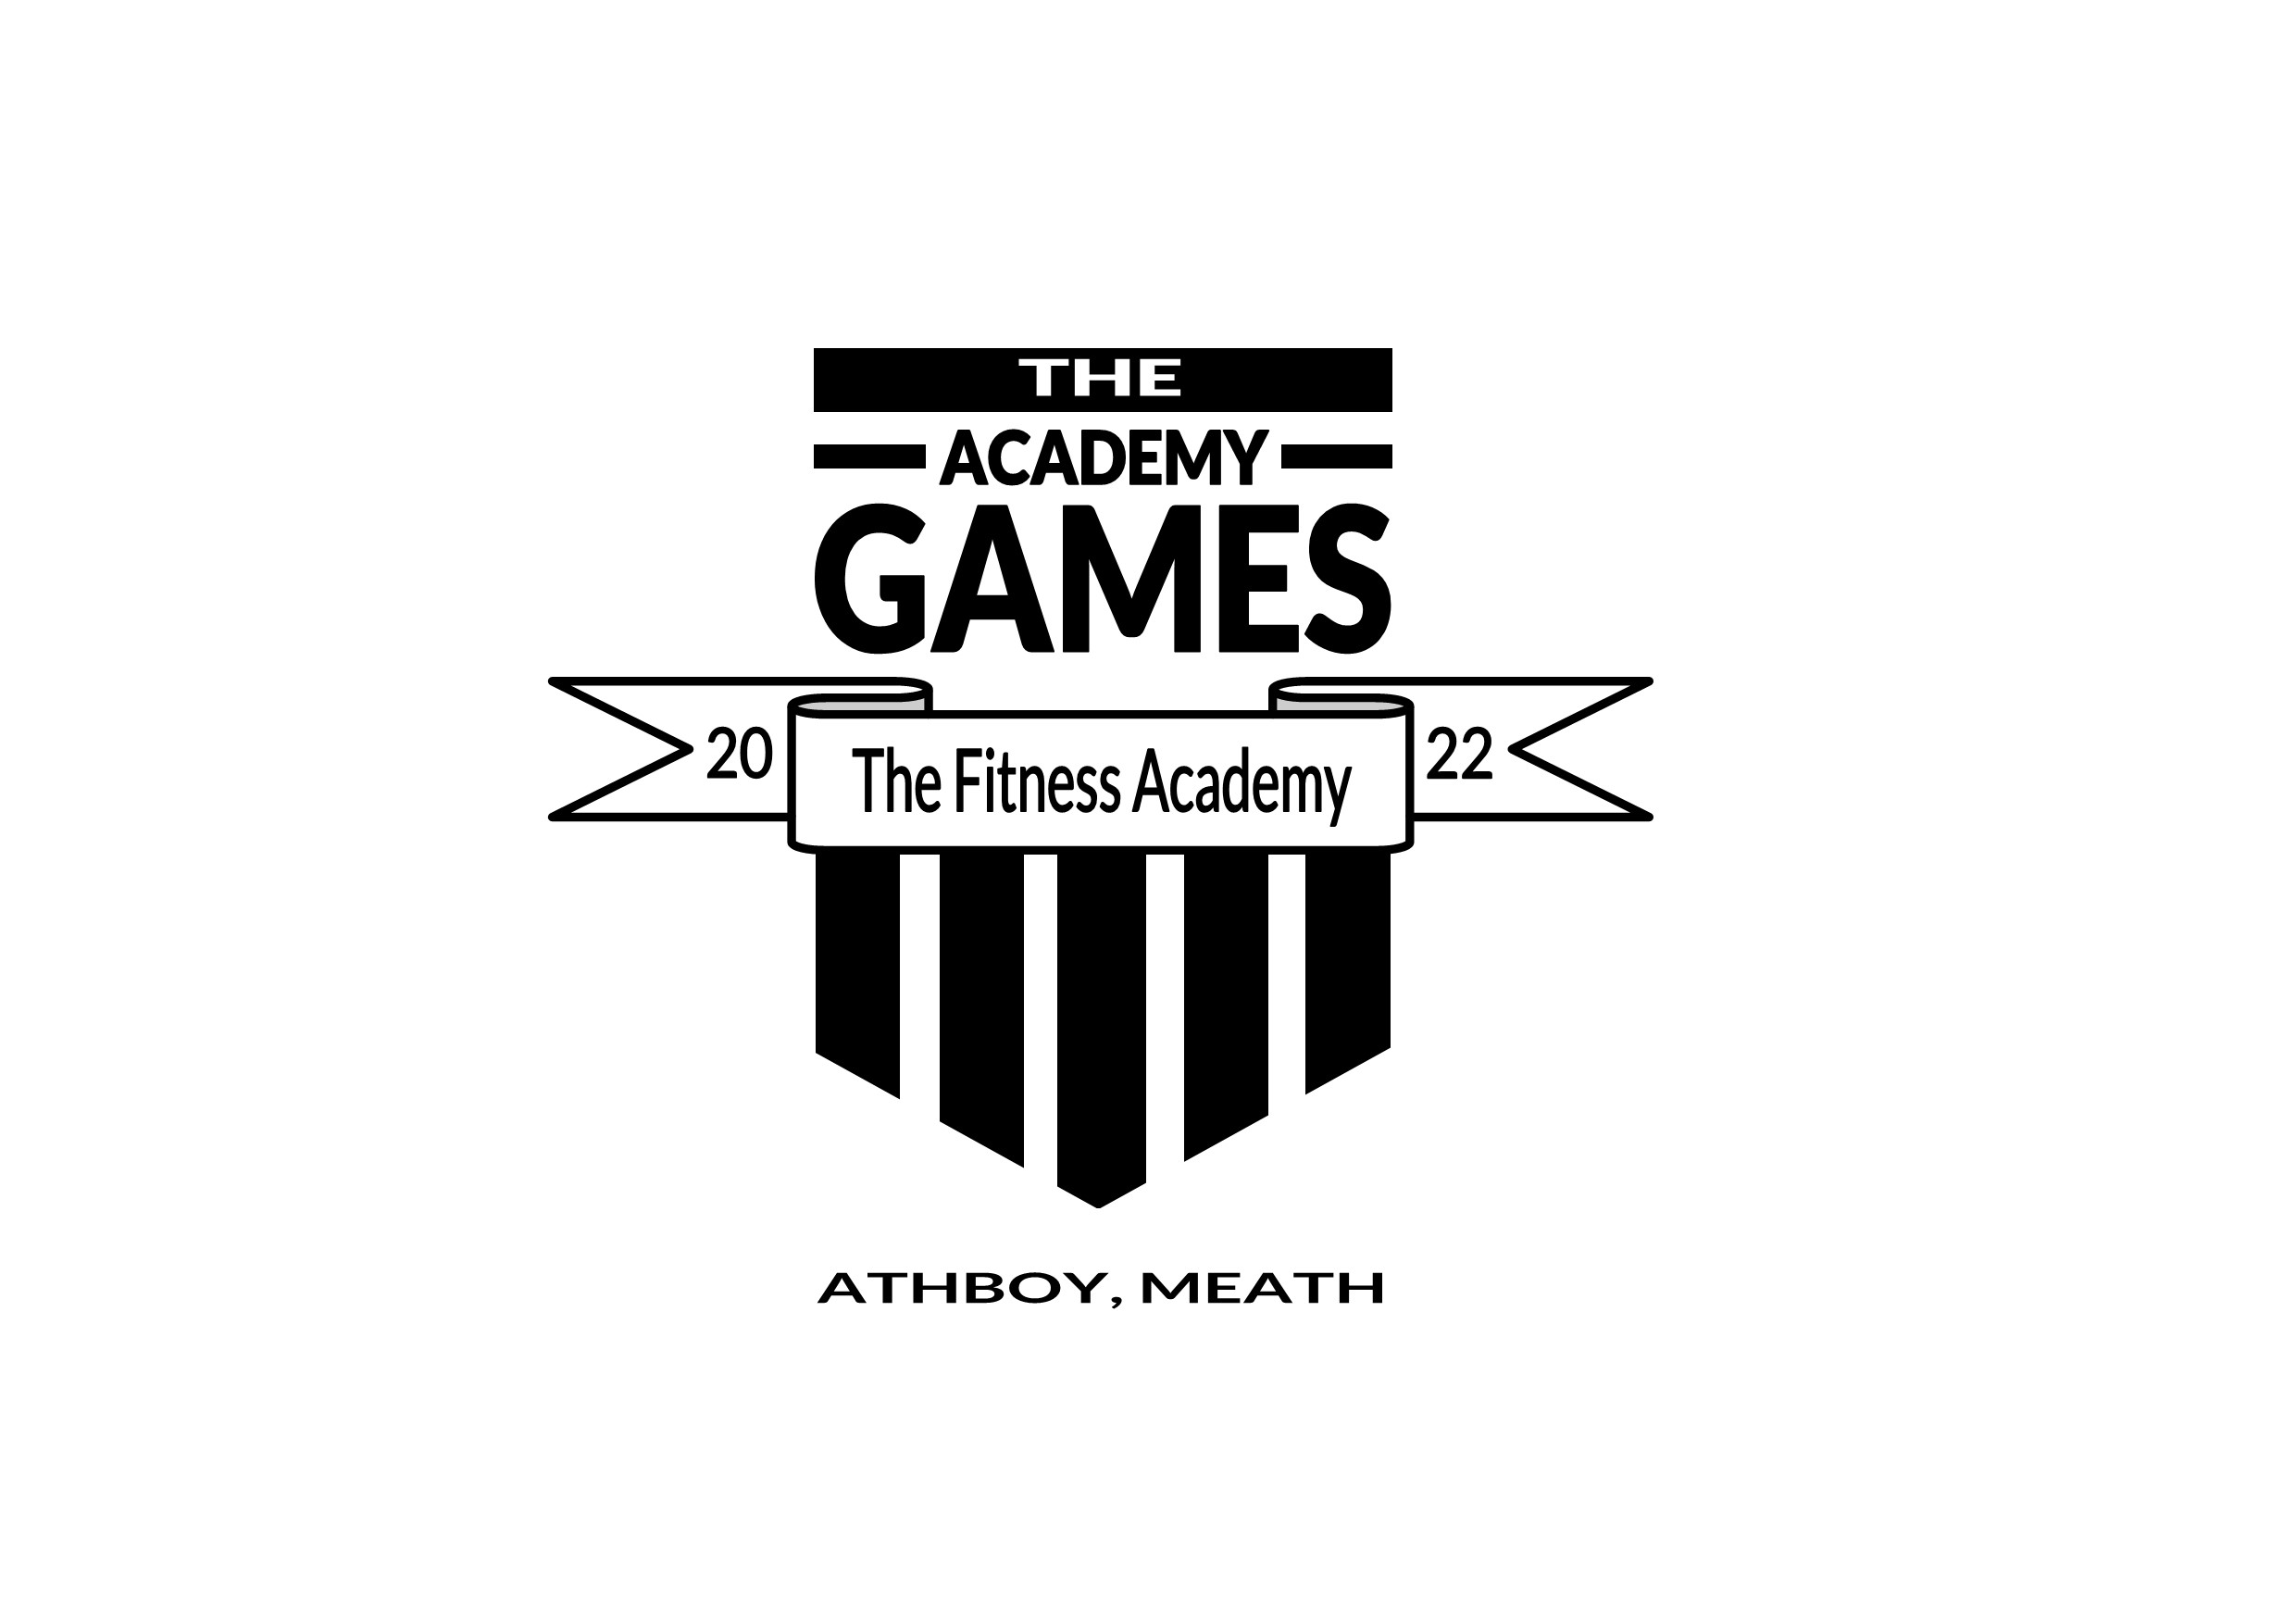  THE ACADEMY GAMES